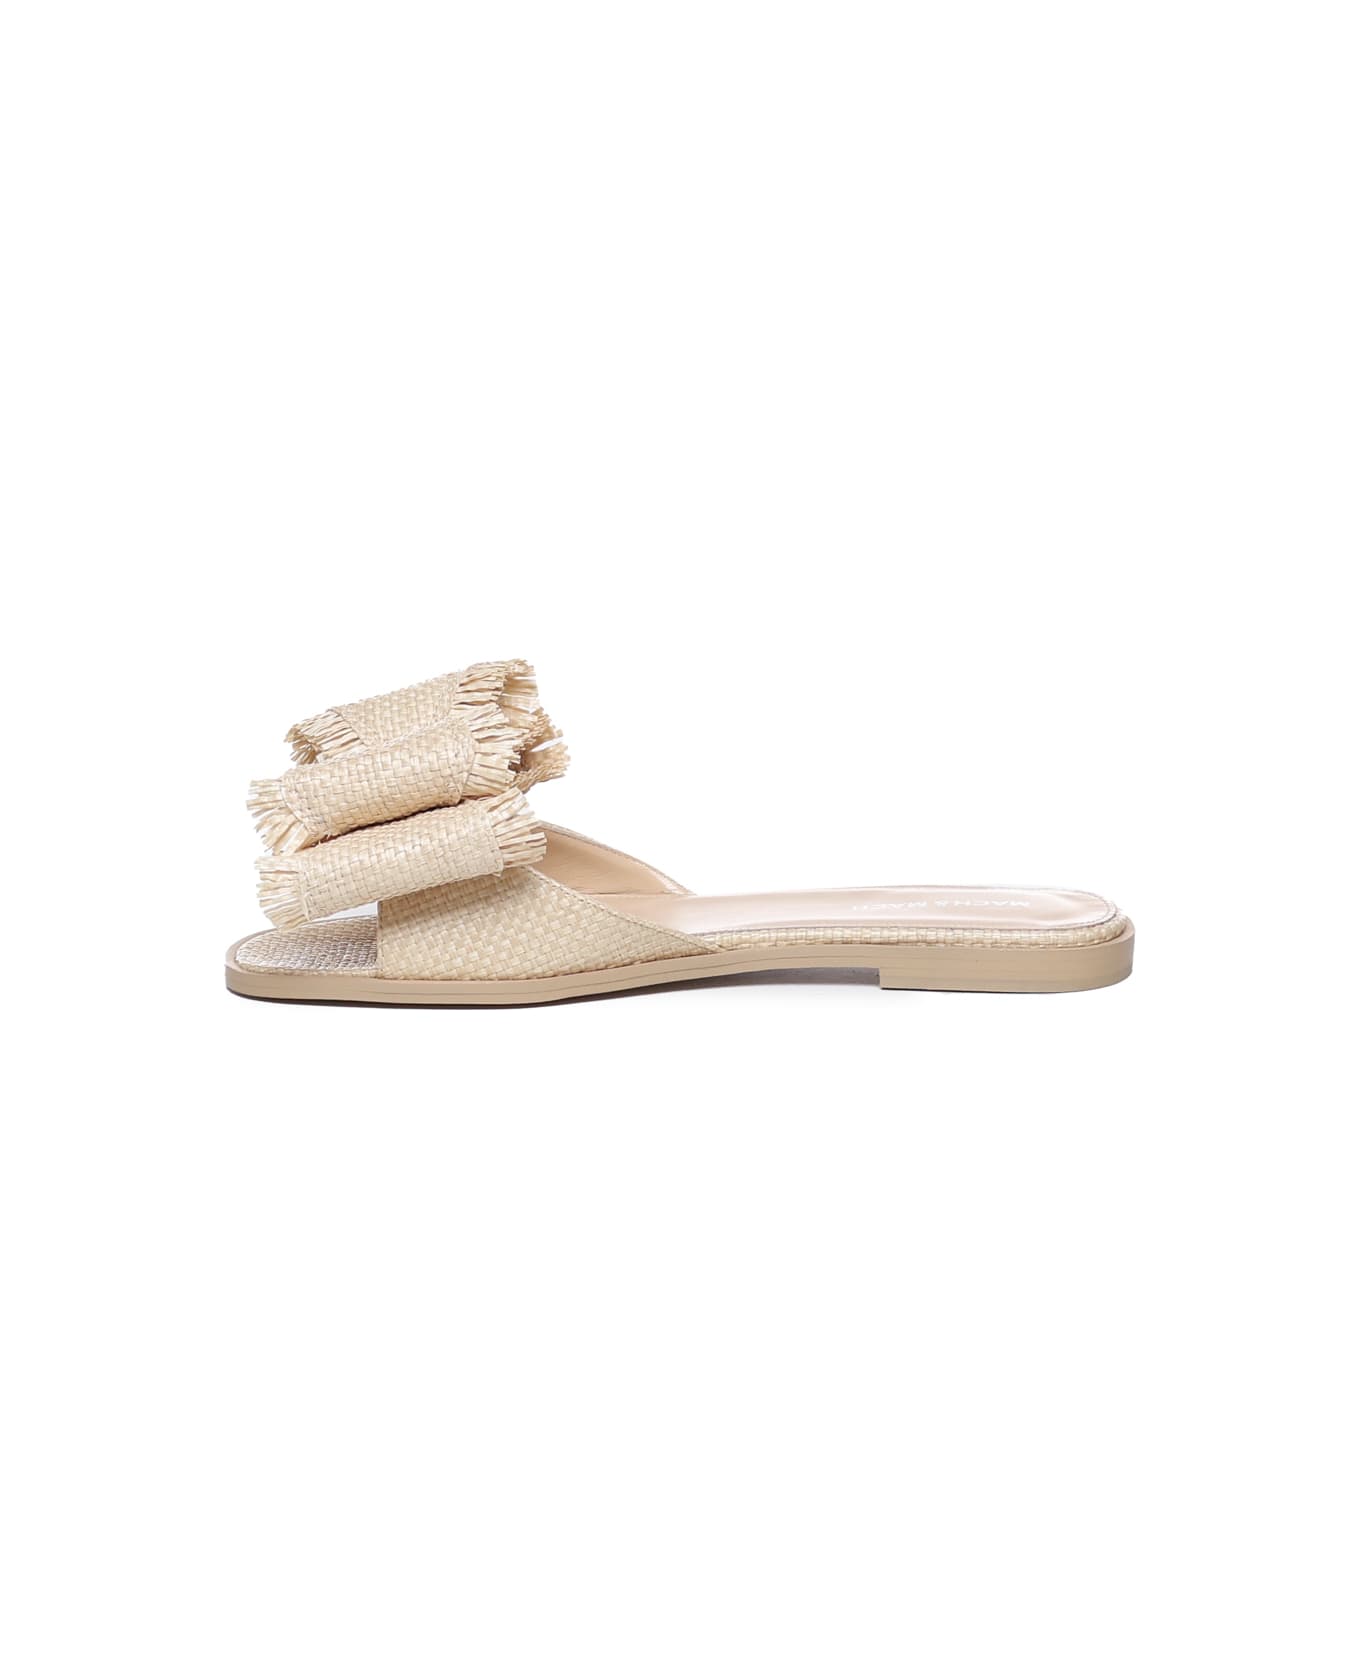 Mach & Mach Flat Sandal In Rope And Leather - Beige